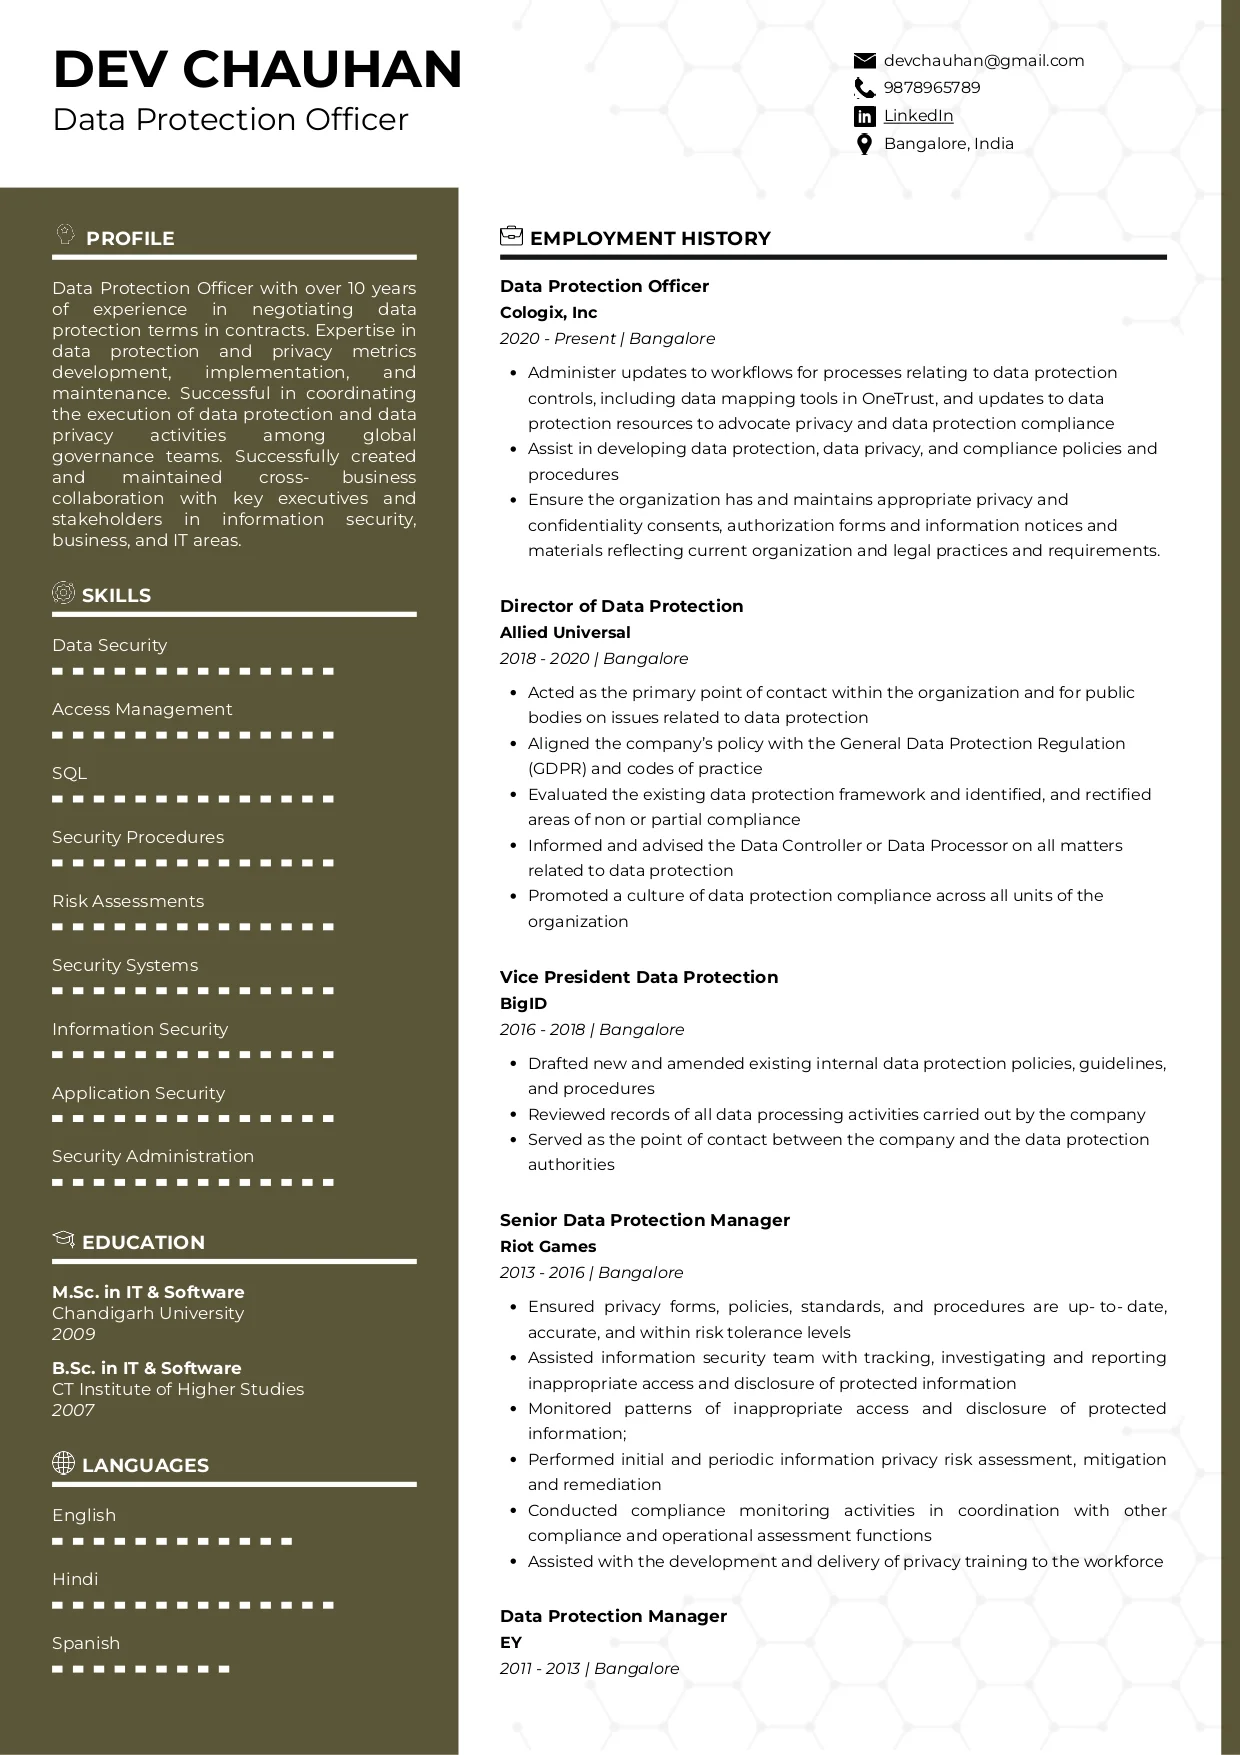 Sample Resume of Data Protection Officer | Free Resume Templates & Samples on Resumod.co